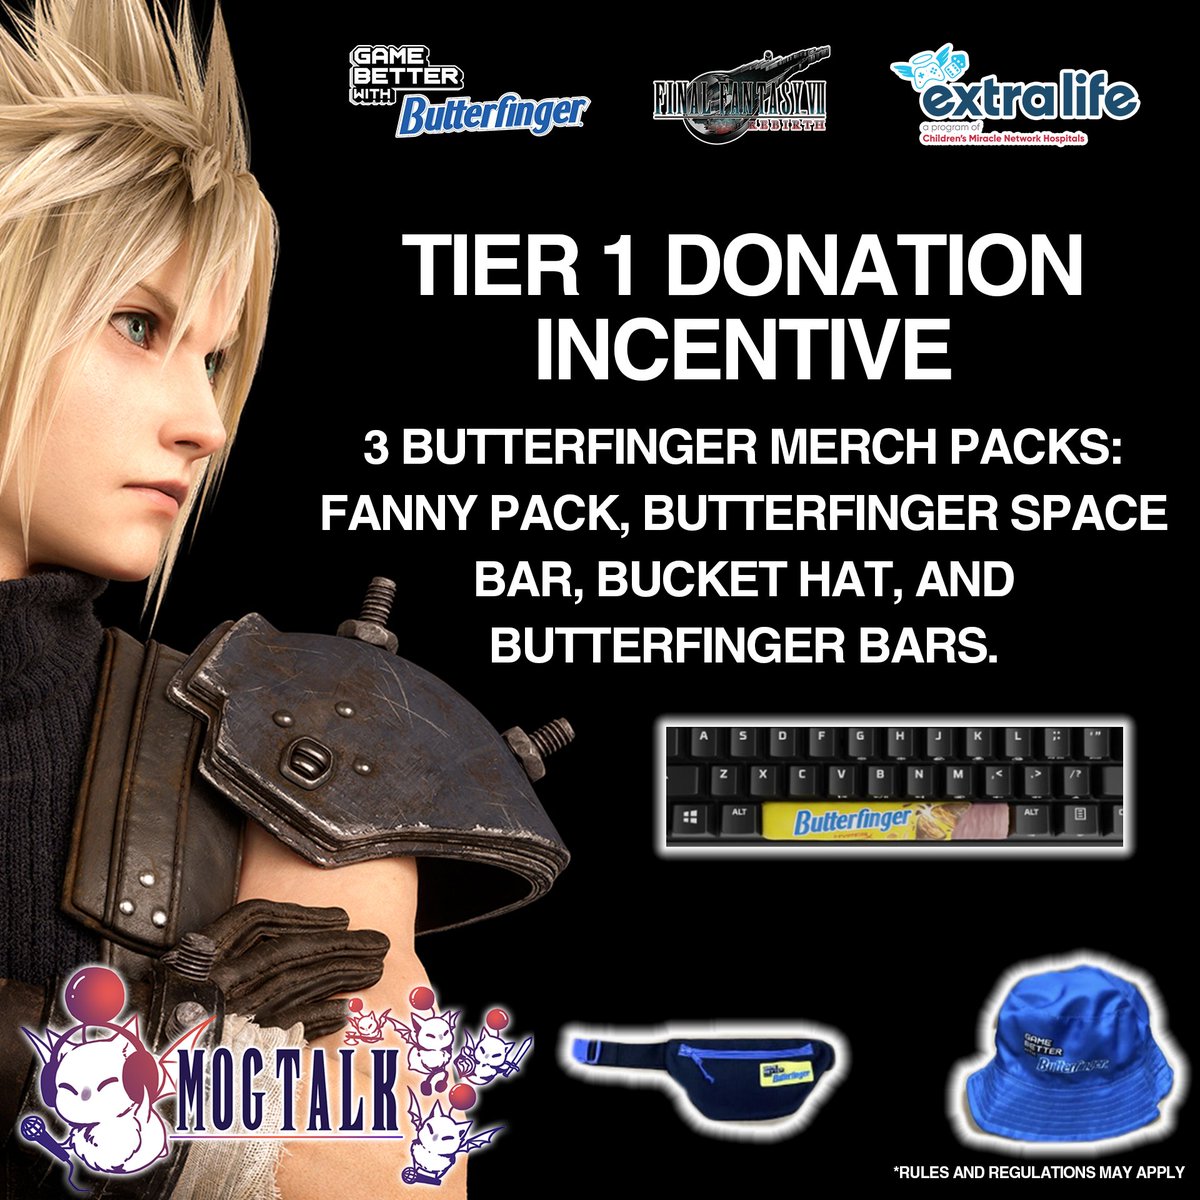 TODAY WE BEGIN FF7 REBIRTH! Thank you @SquareEnix for the game! #ad We are also raising money for @ExtraLife4Kids and partnering with @Butterfinger for giveaways! Our first giveaway incentive goal unlocks at just $500 raised. STARTING NOW!! twitch -> MogTalk